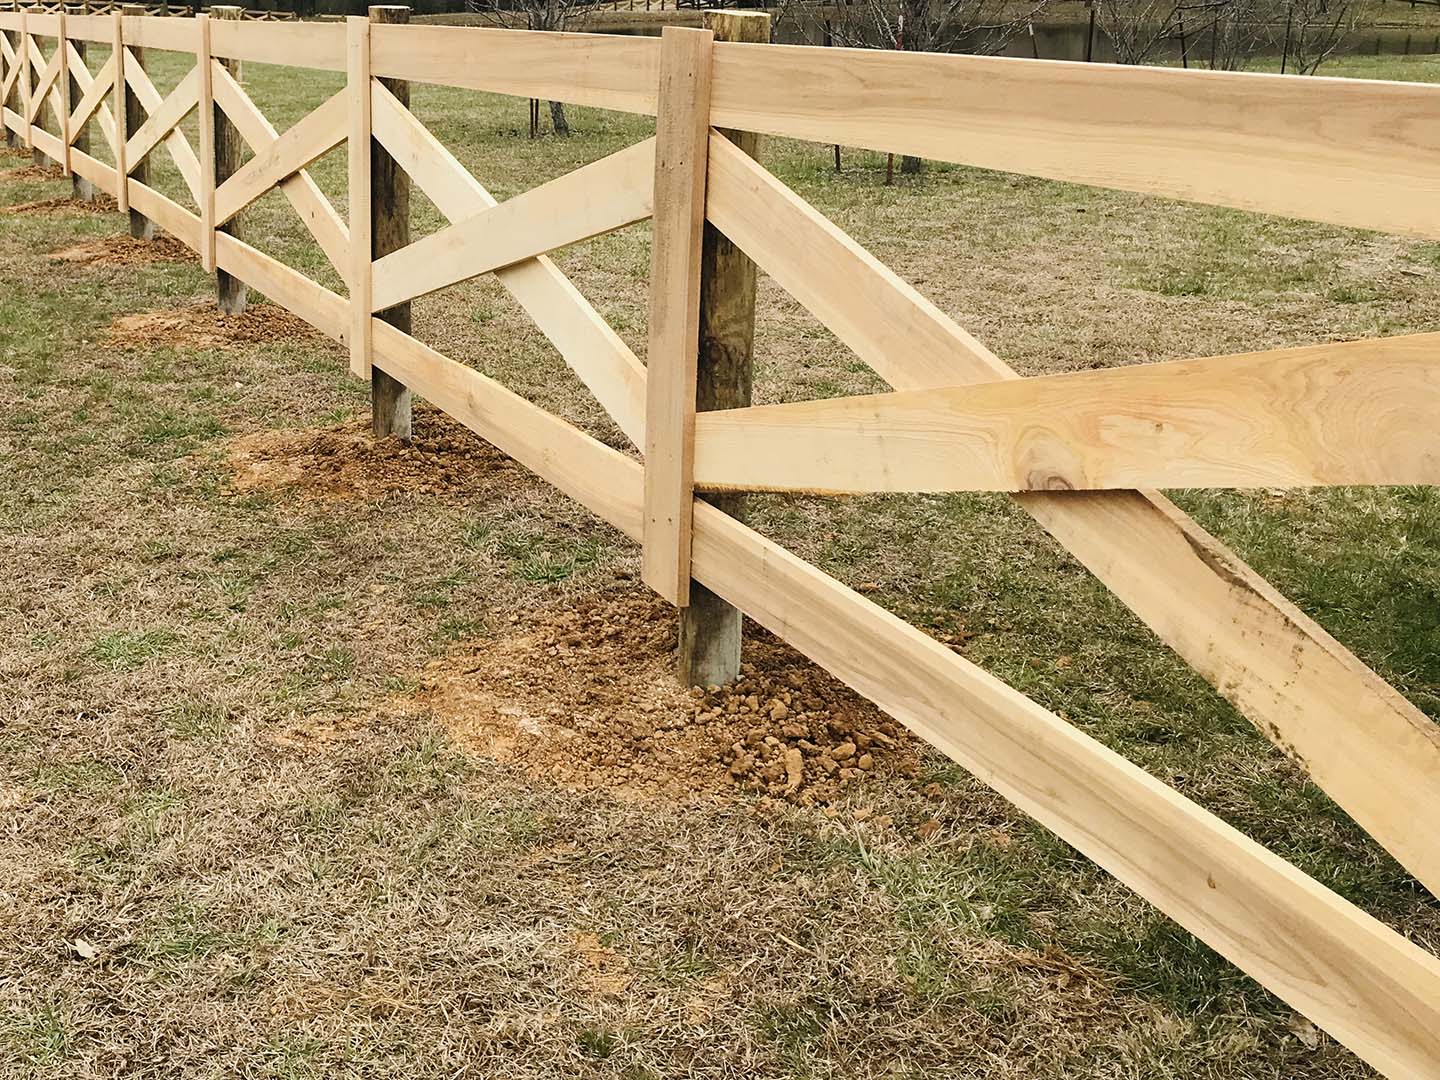  Milan Tennessee Fence Project Photo